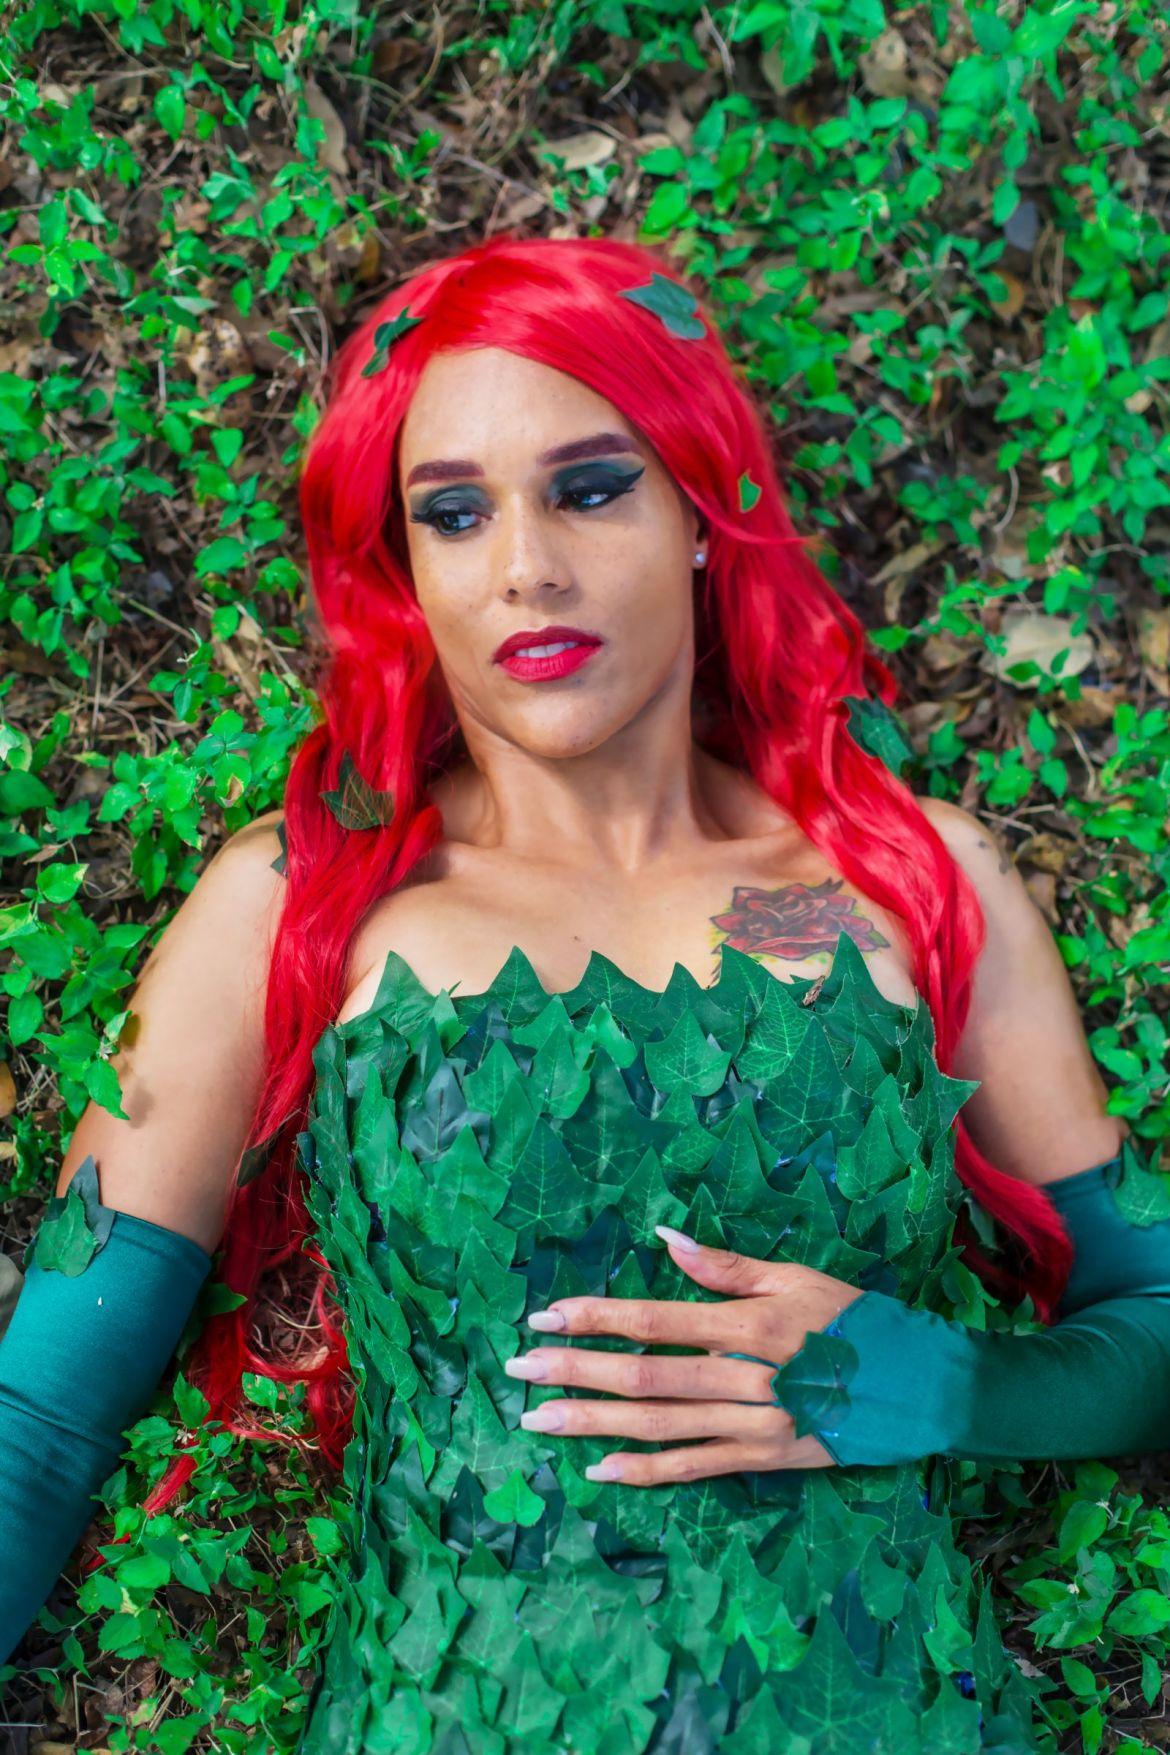 50+ Hot Pictures Of Poison Ivy – One Of The Most Beautiful Batman’s Villain 15